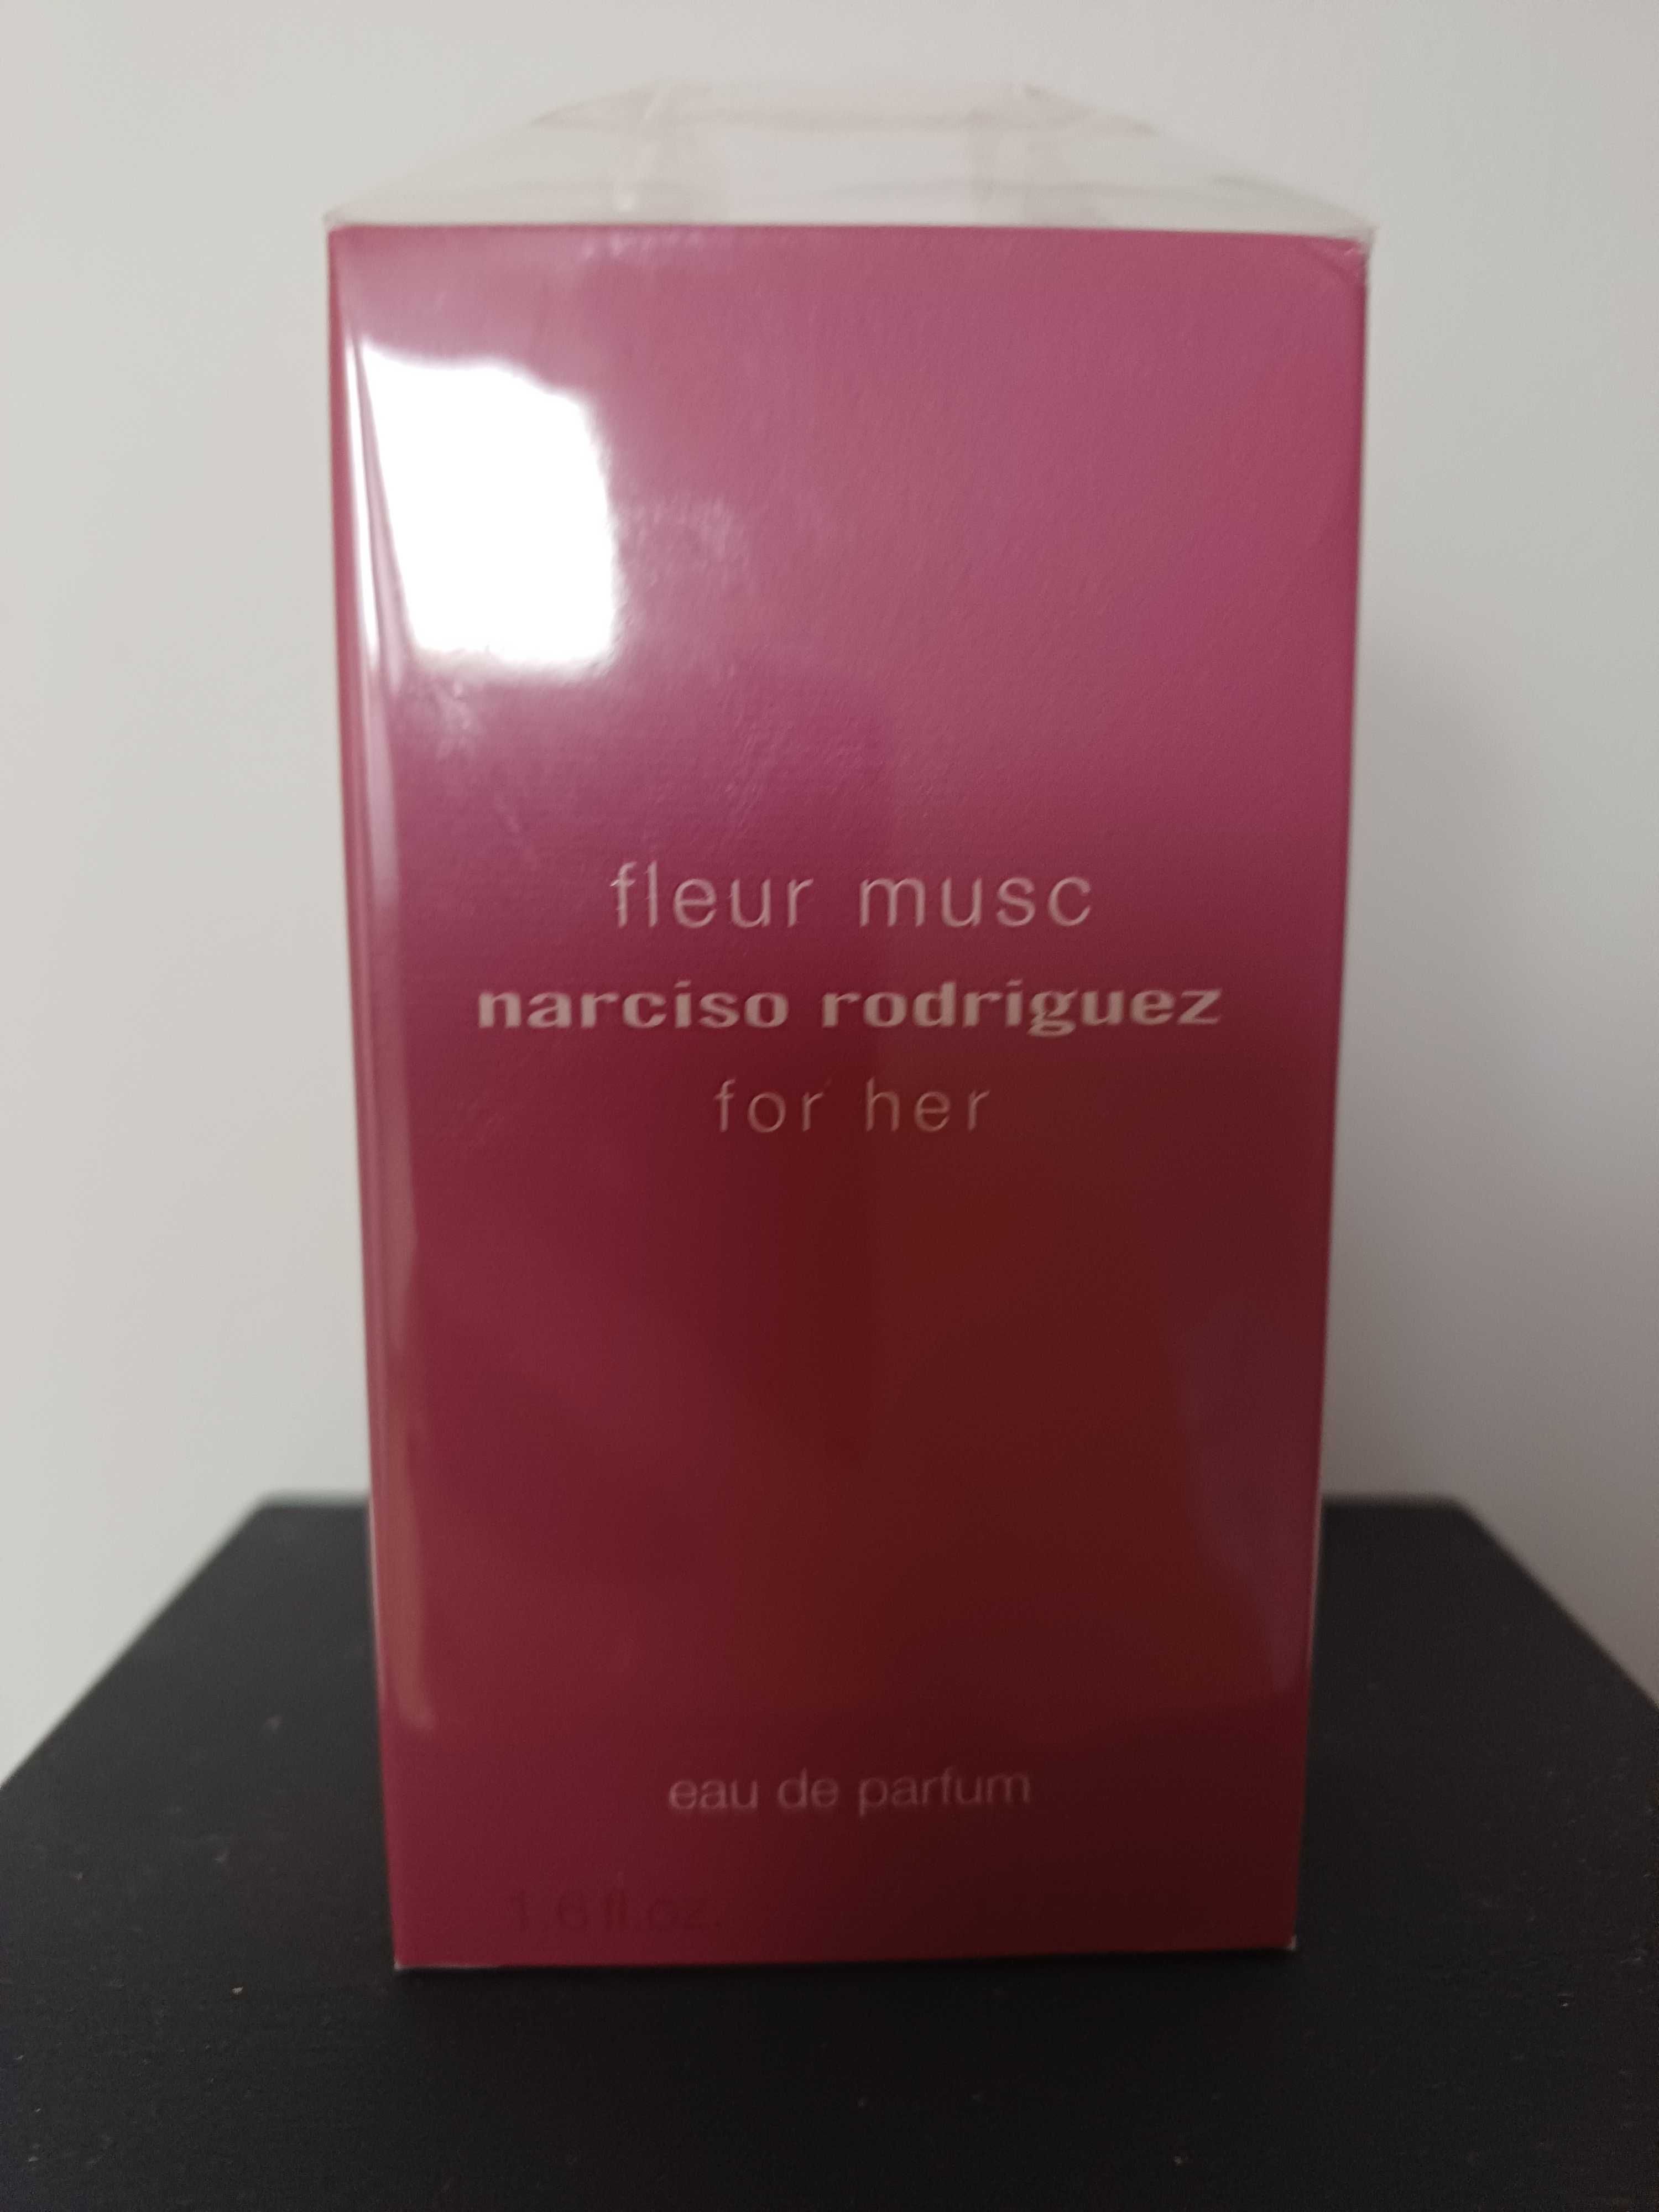 Narciso Rodriguez for her fleur musc 50ml